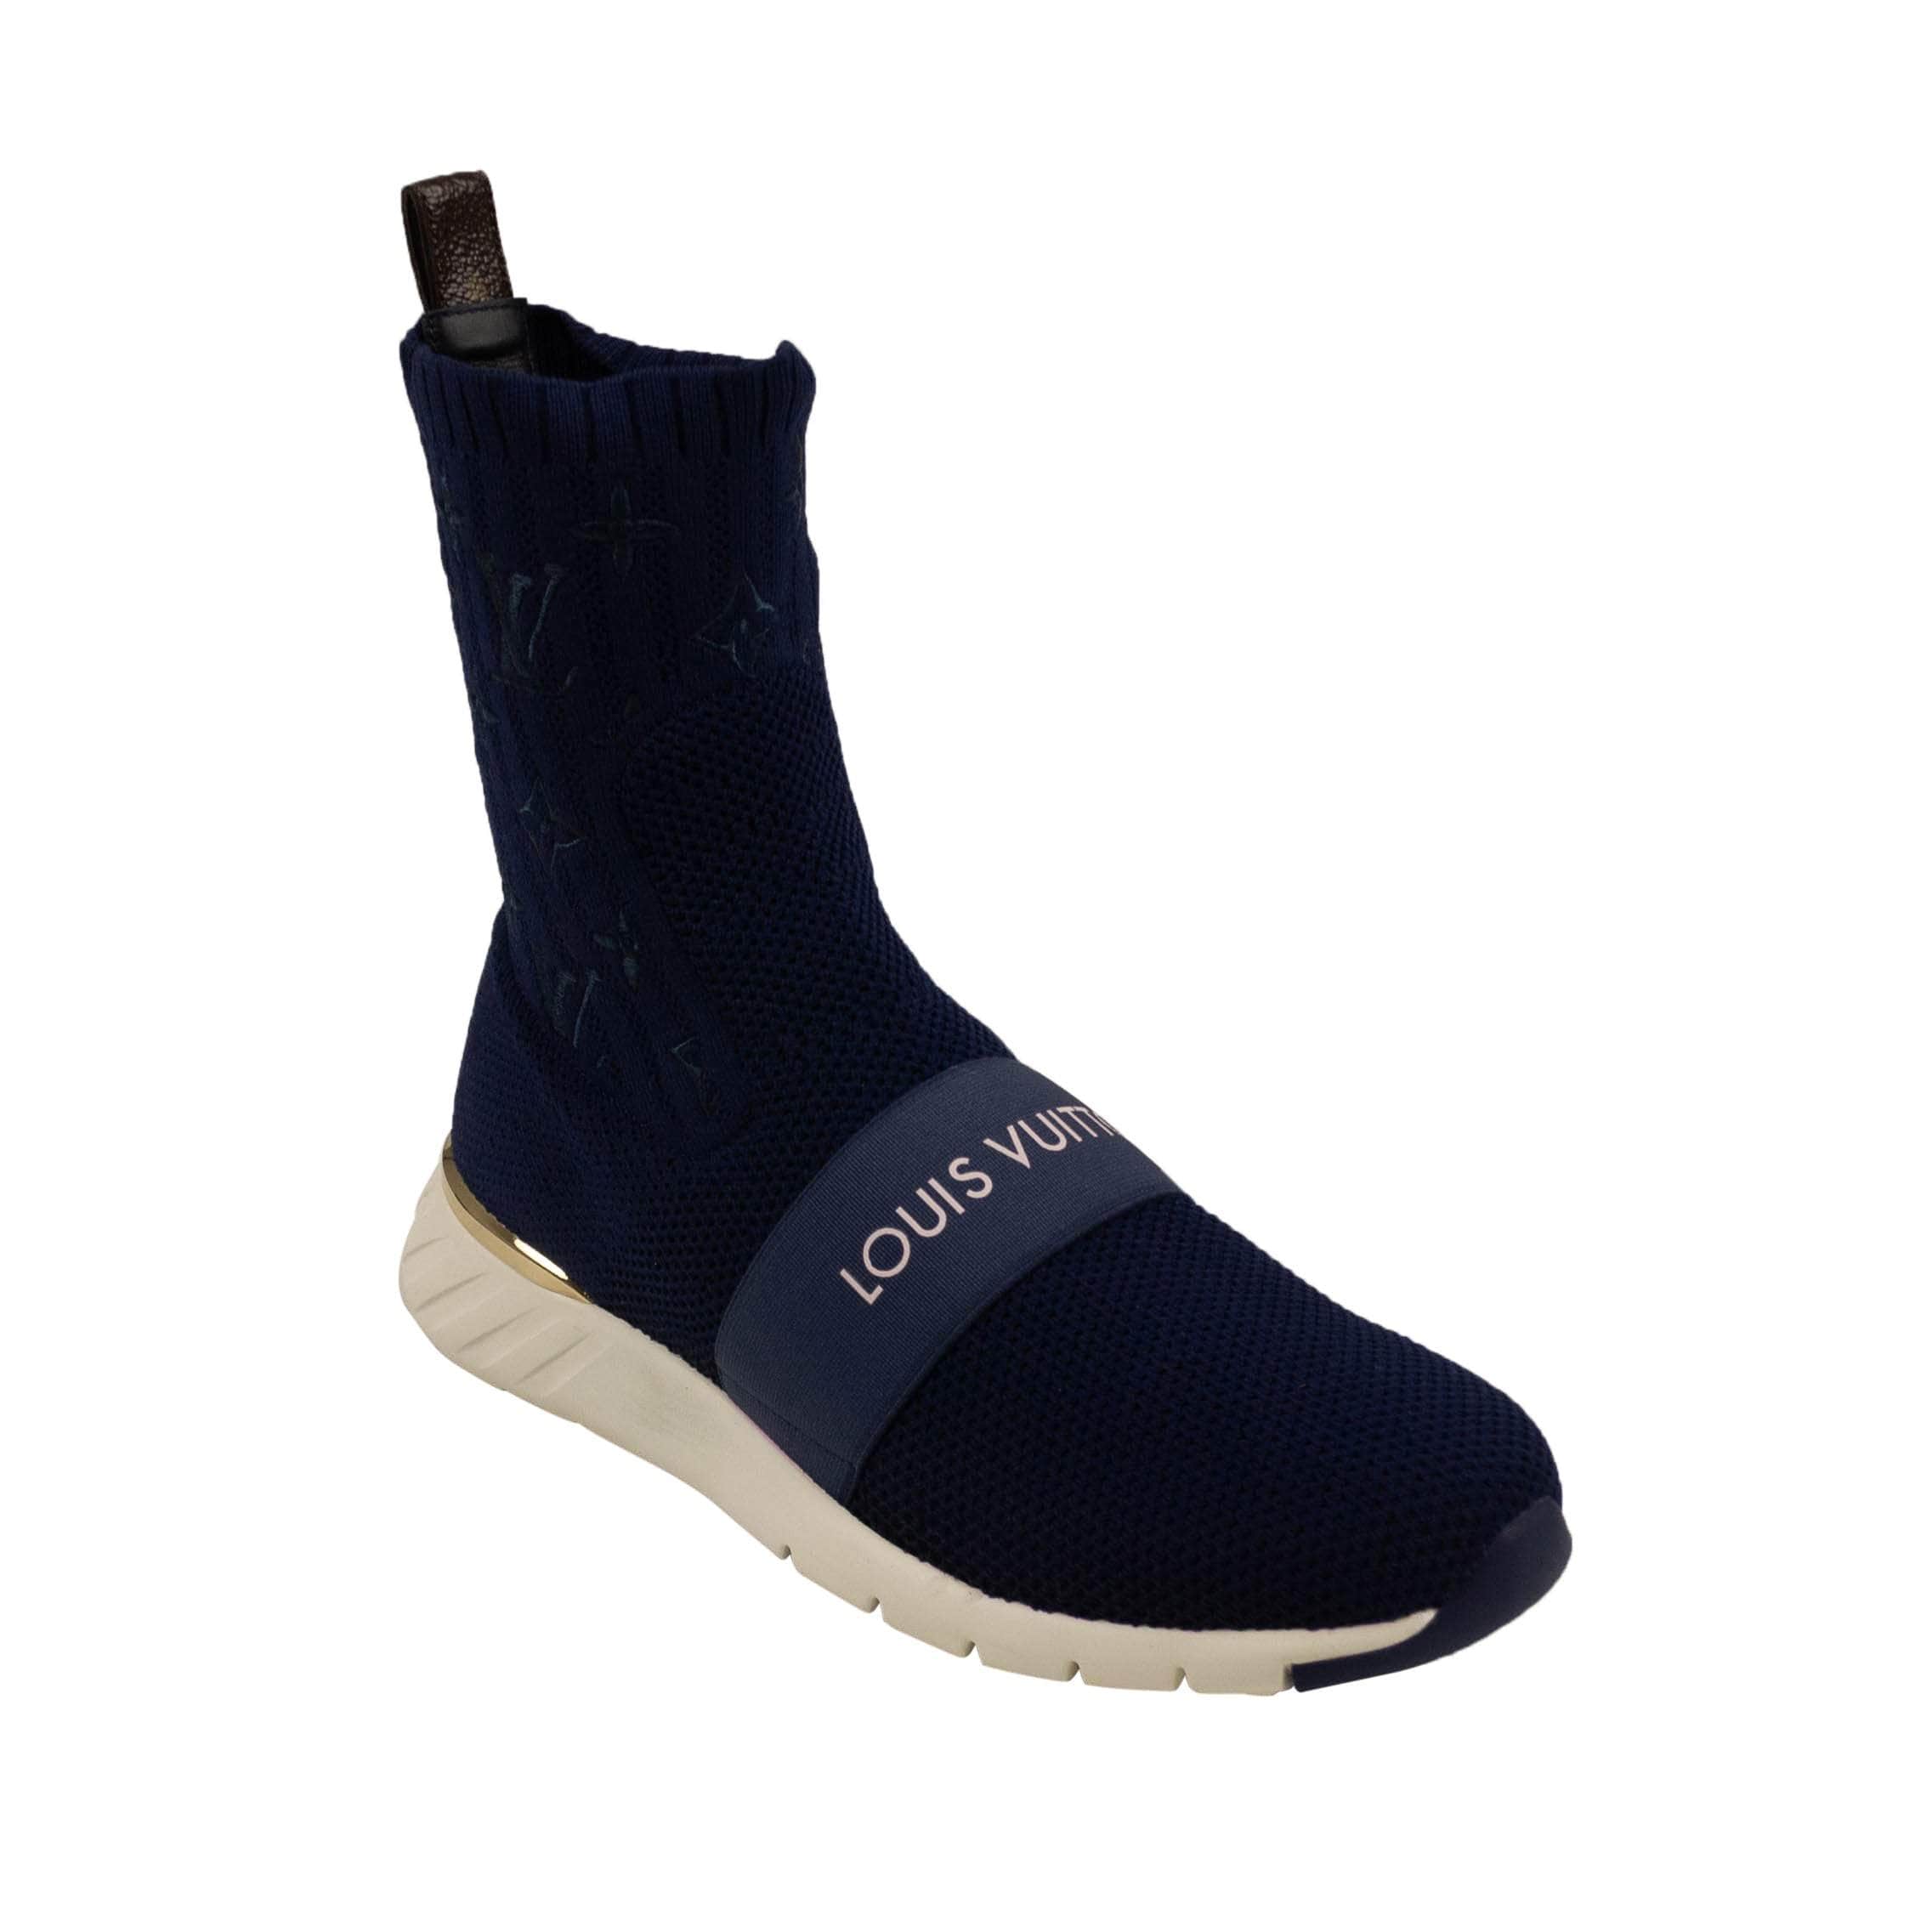 Louis Vuitton 500-750, channelenable-all, chicmi, couponcollection, gender-womens, main-shoes, size-37-5, SPO, stadiumgoods 37.5 Navy Blue Aftergame Sneaker Boots 95-LVT-2051/37.5 95-LVT-2051/37.5